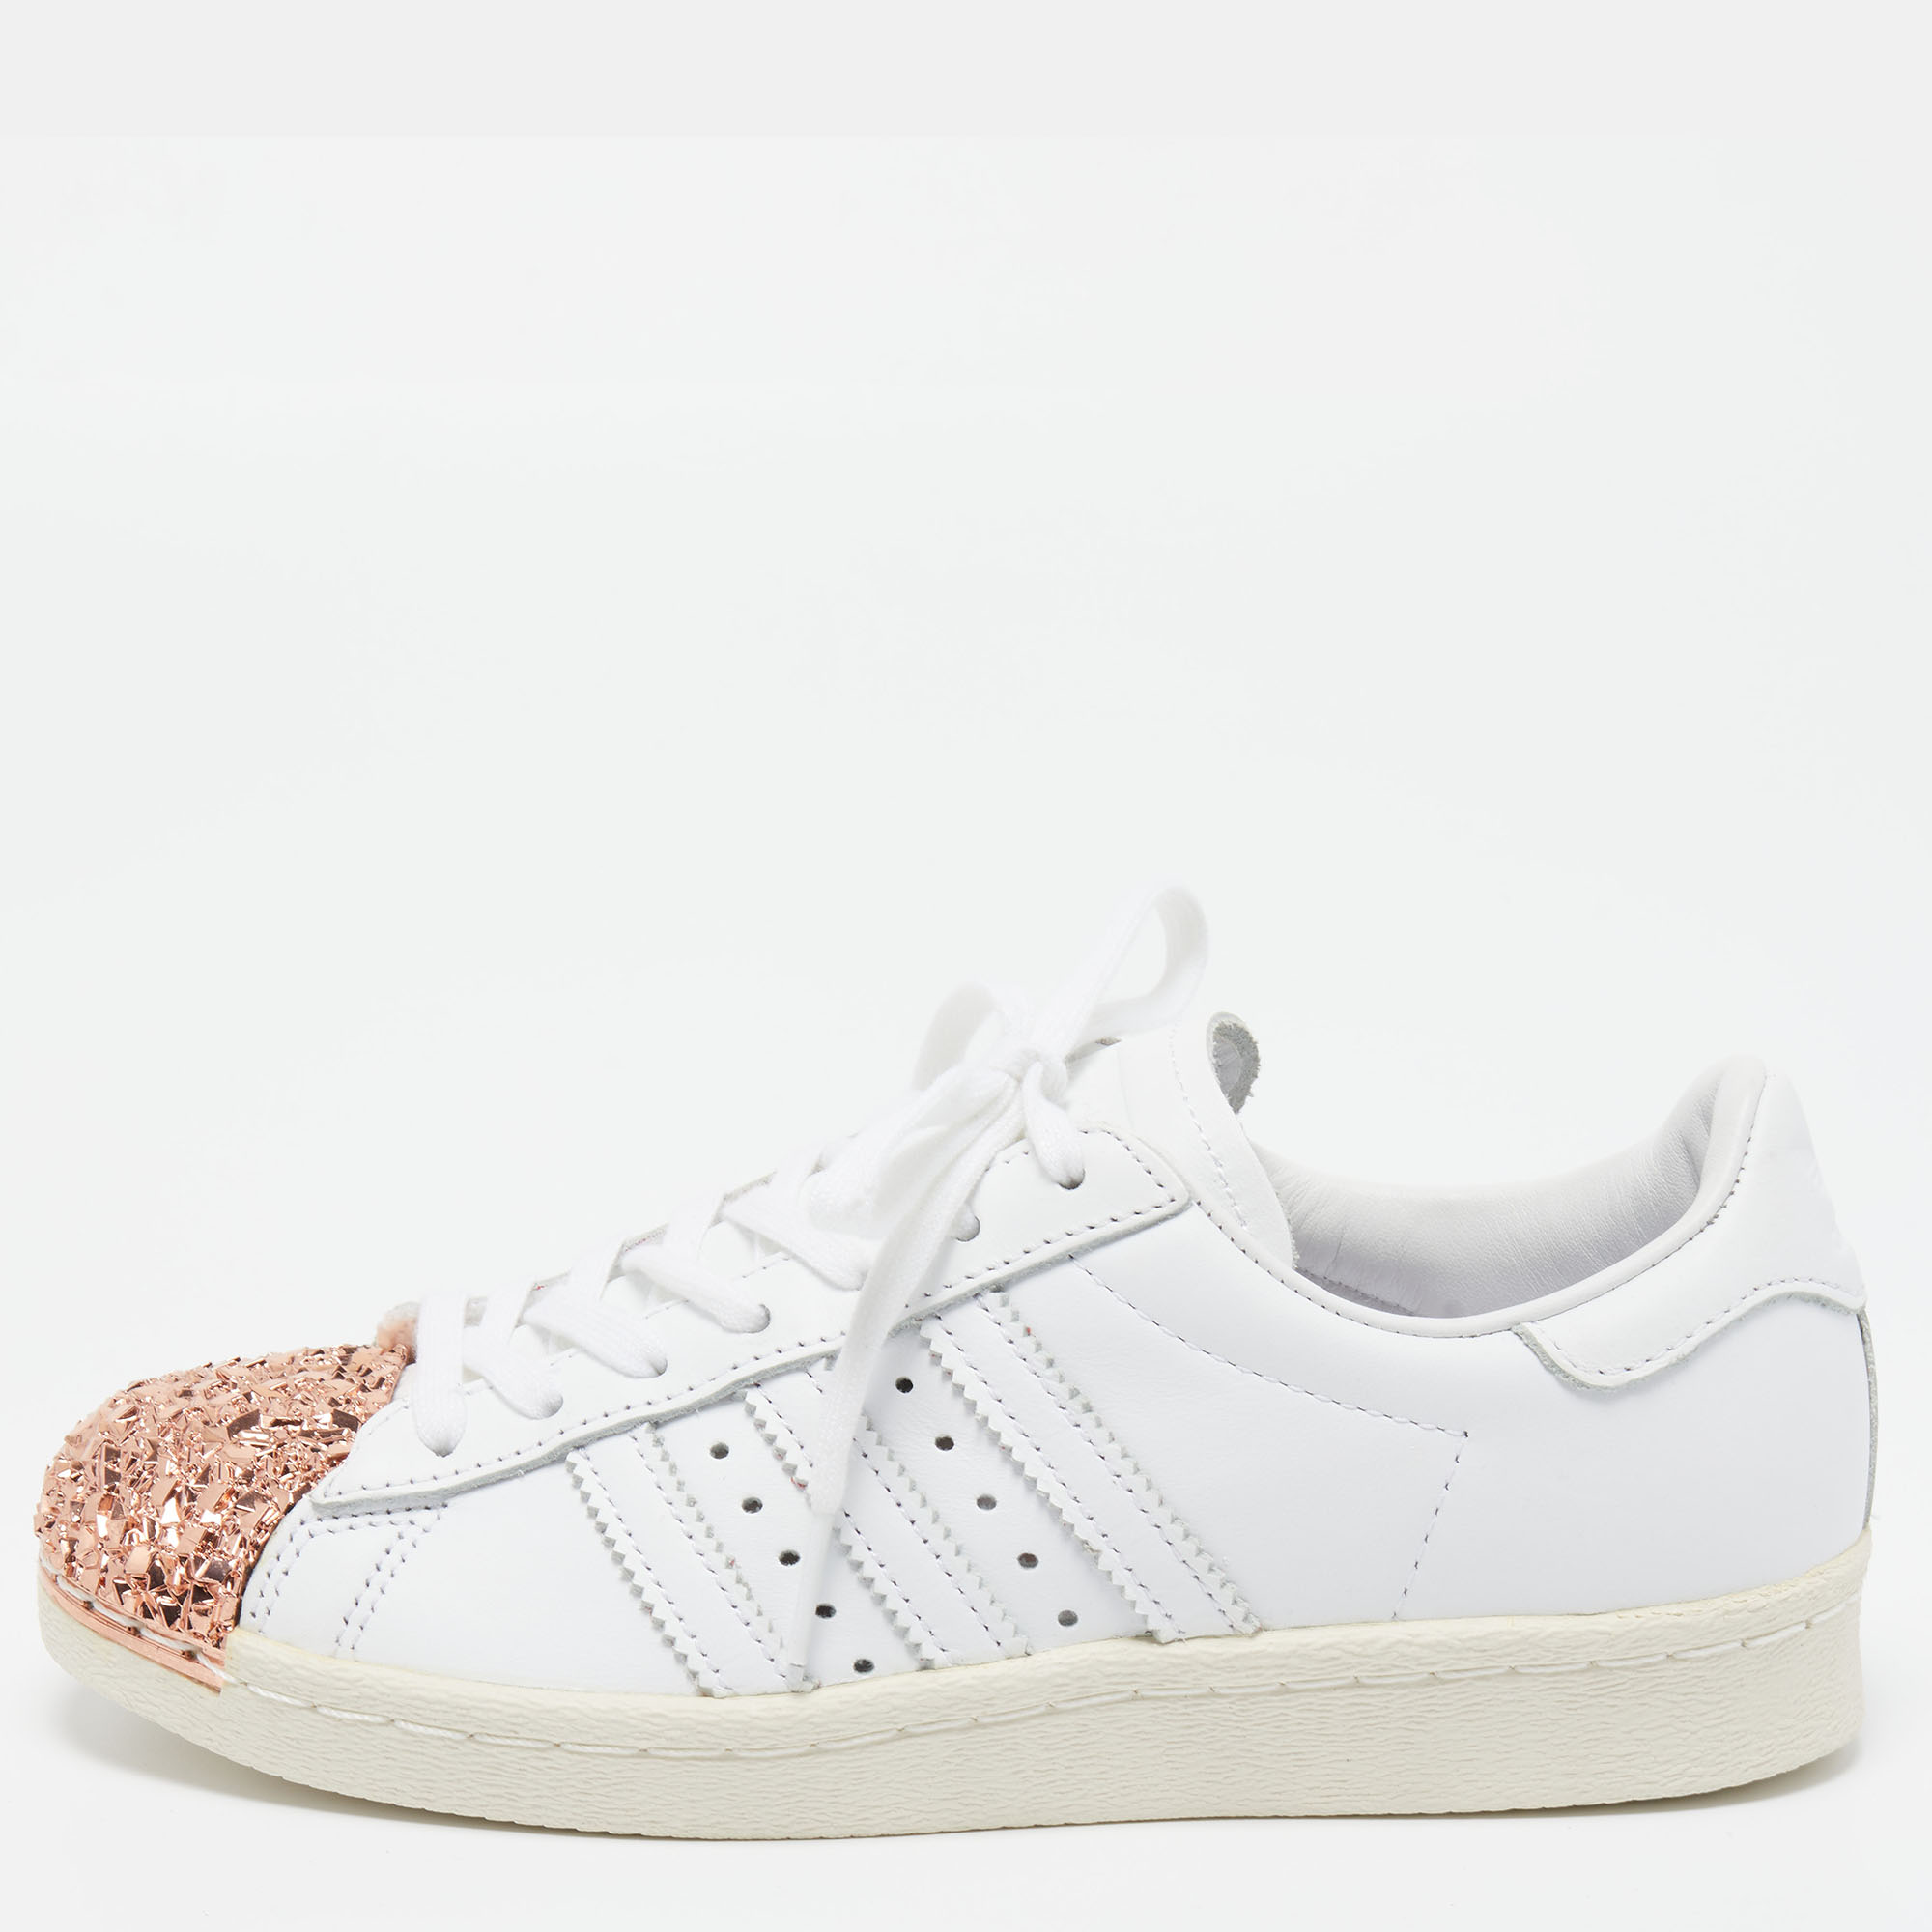 Adidas White/Pink Leather And Metal Superstar Sneakers Size 37.5